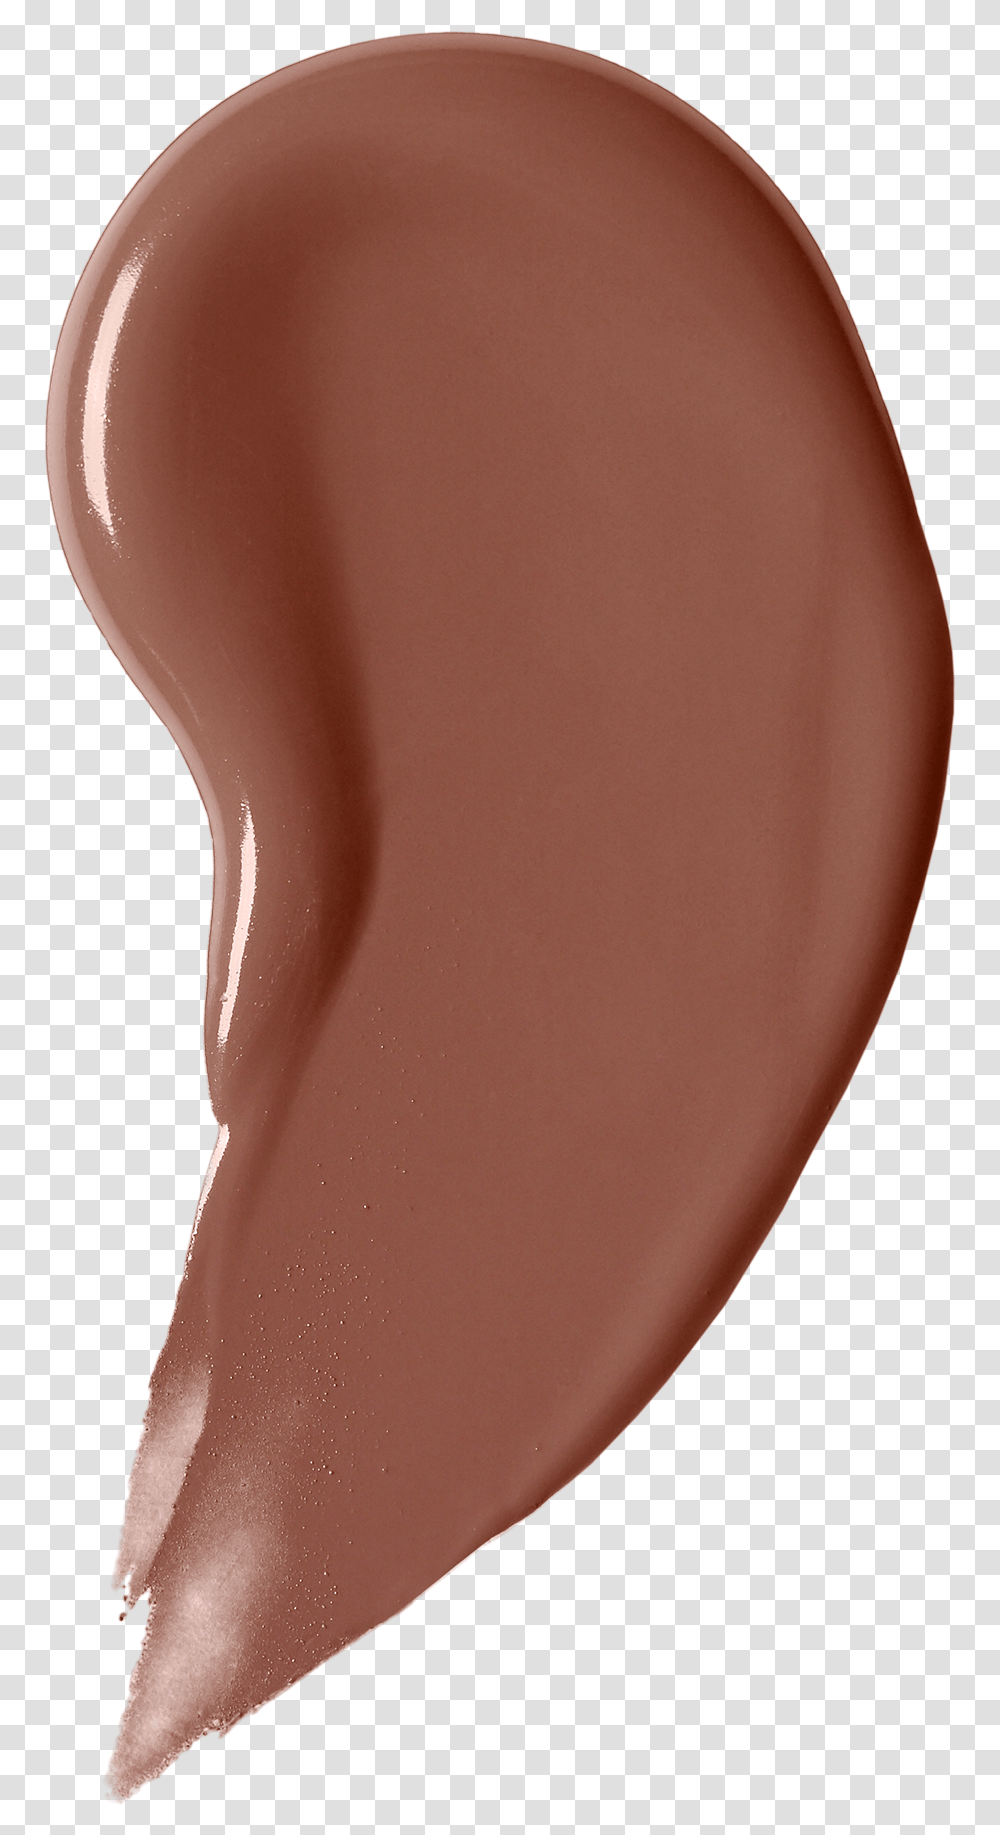 Chocolate, Sweets, Food, Dessert Transparent Png